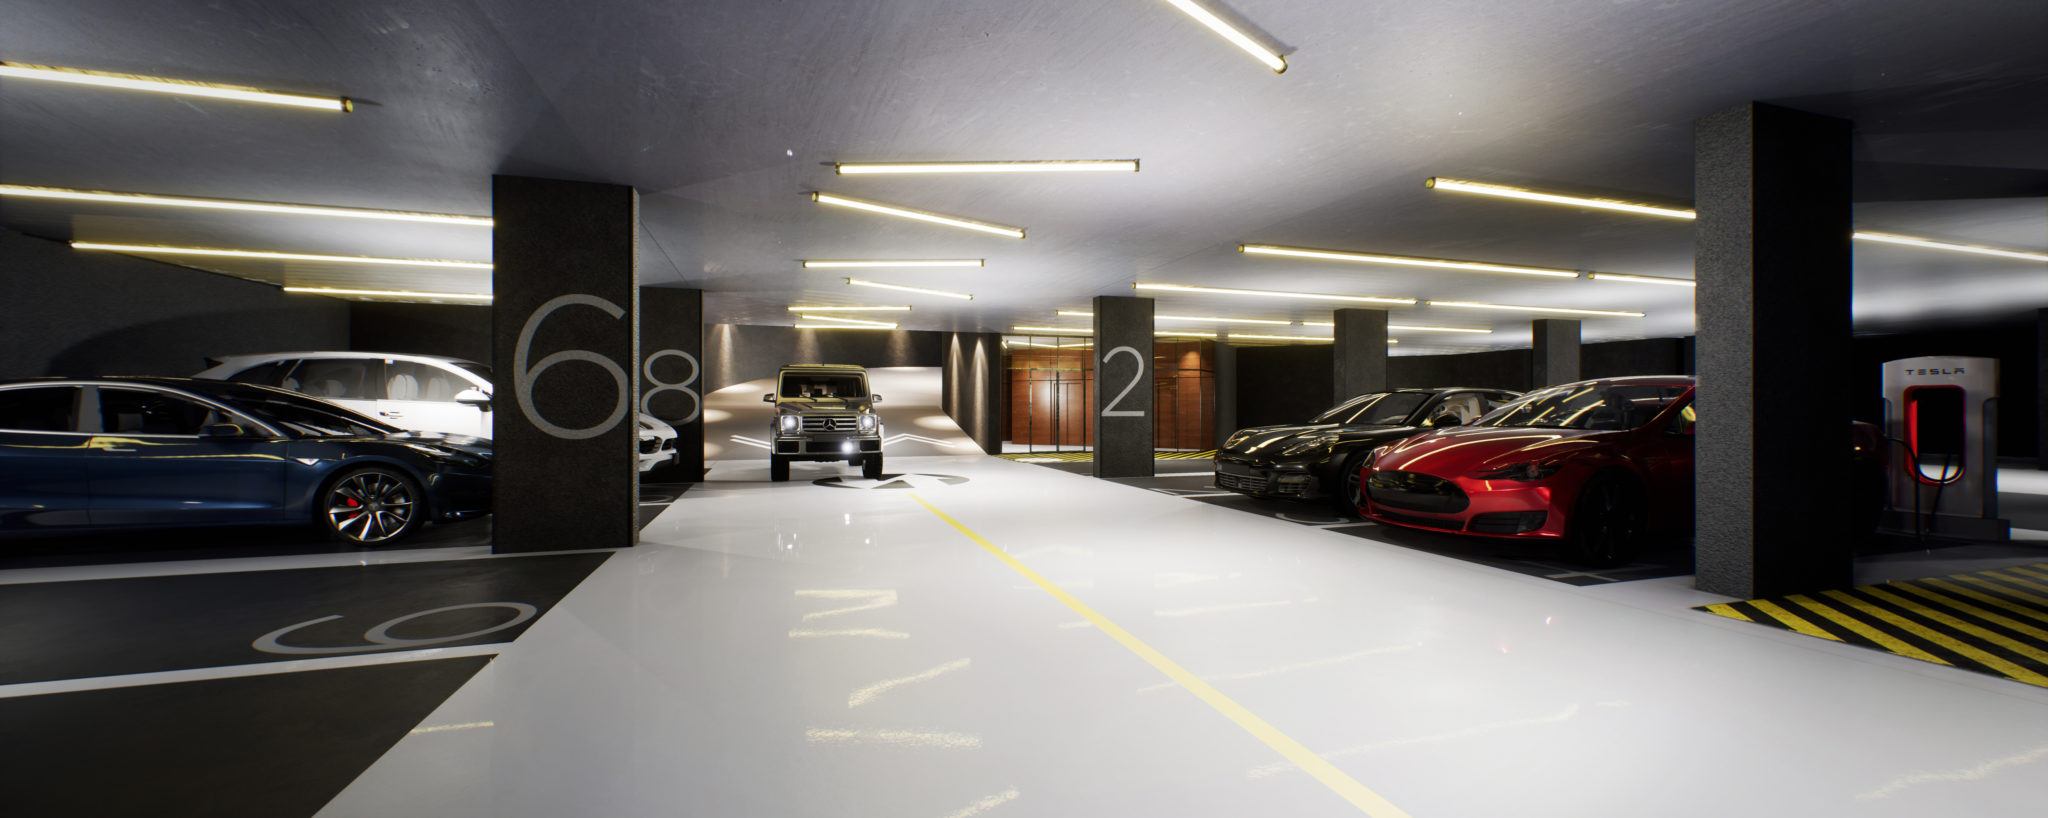 Picture of 1181 Queen St. West's underground parking garage. Toronto real estate agent because, so, due to, while, since, therefore same, less, rather, while....